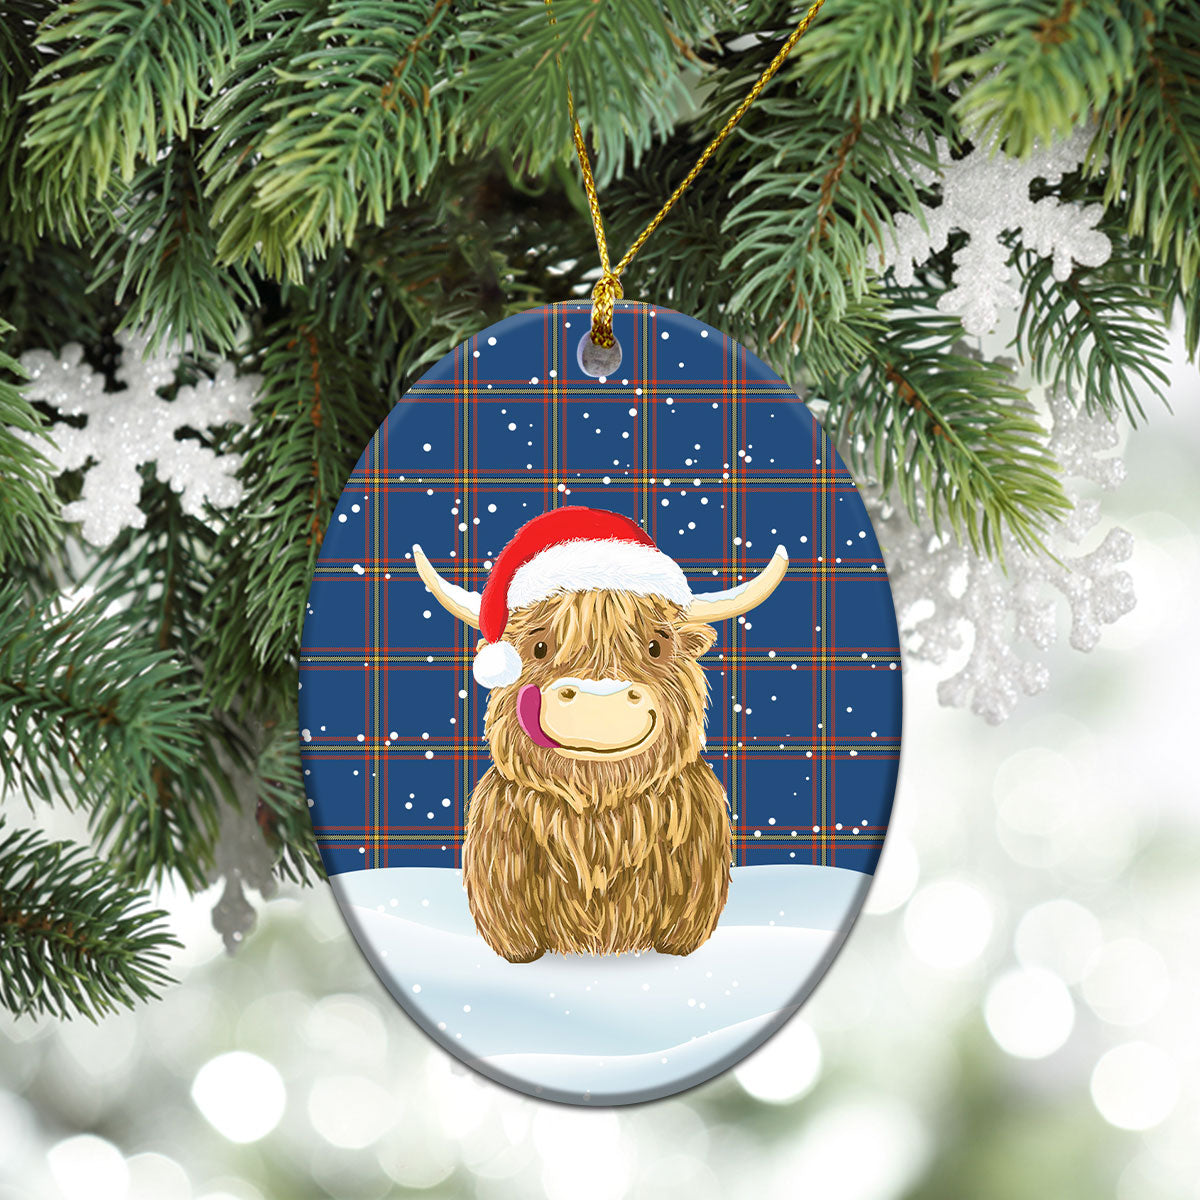 MacLaine of Loch Buie Hunting Ancient Tartan Christmas Ceramic Ornament - Highland Cows Style